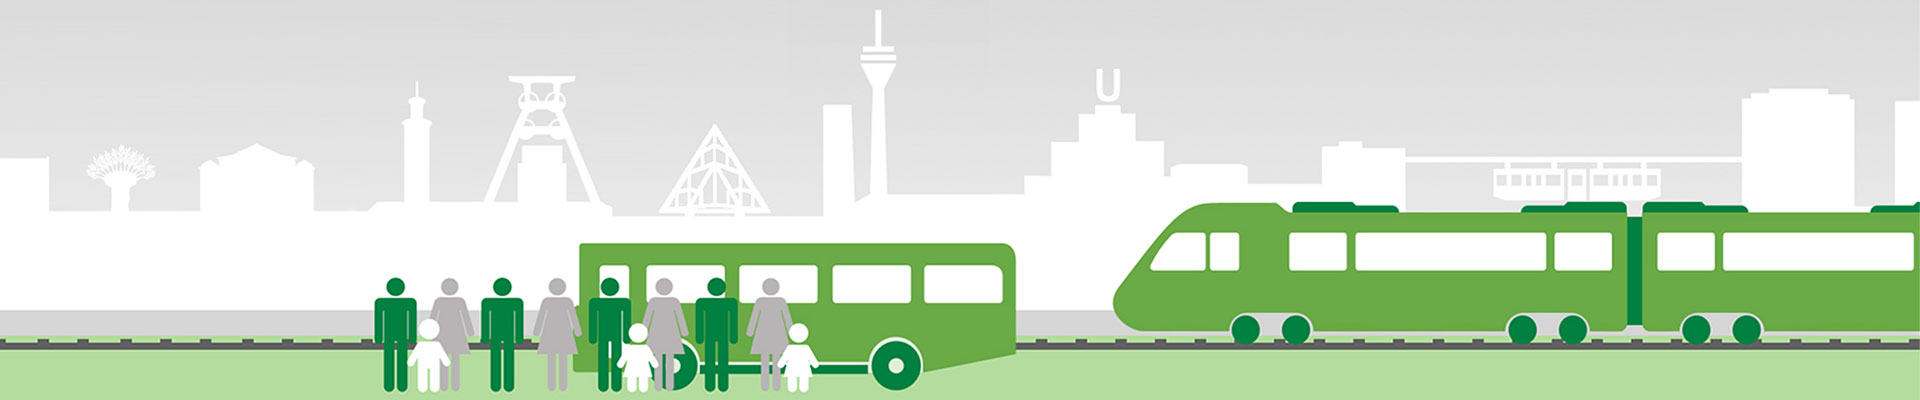 The illustration shows the landmarks of the Ruhr-Area. A bus, a train and people waiting for them are placed in the front